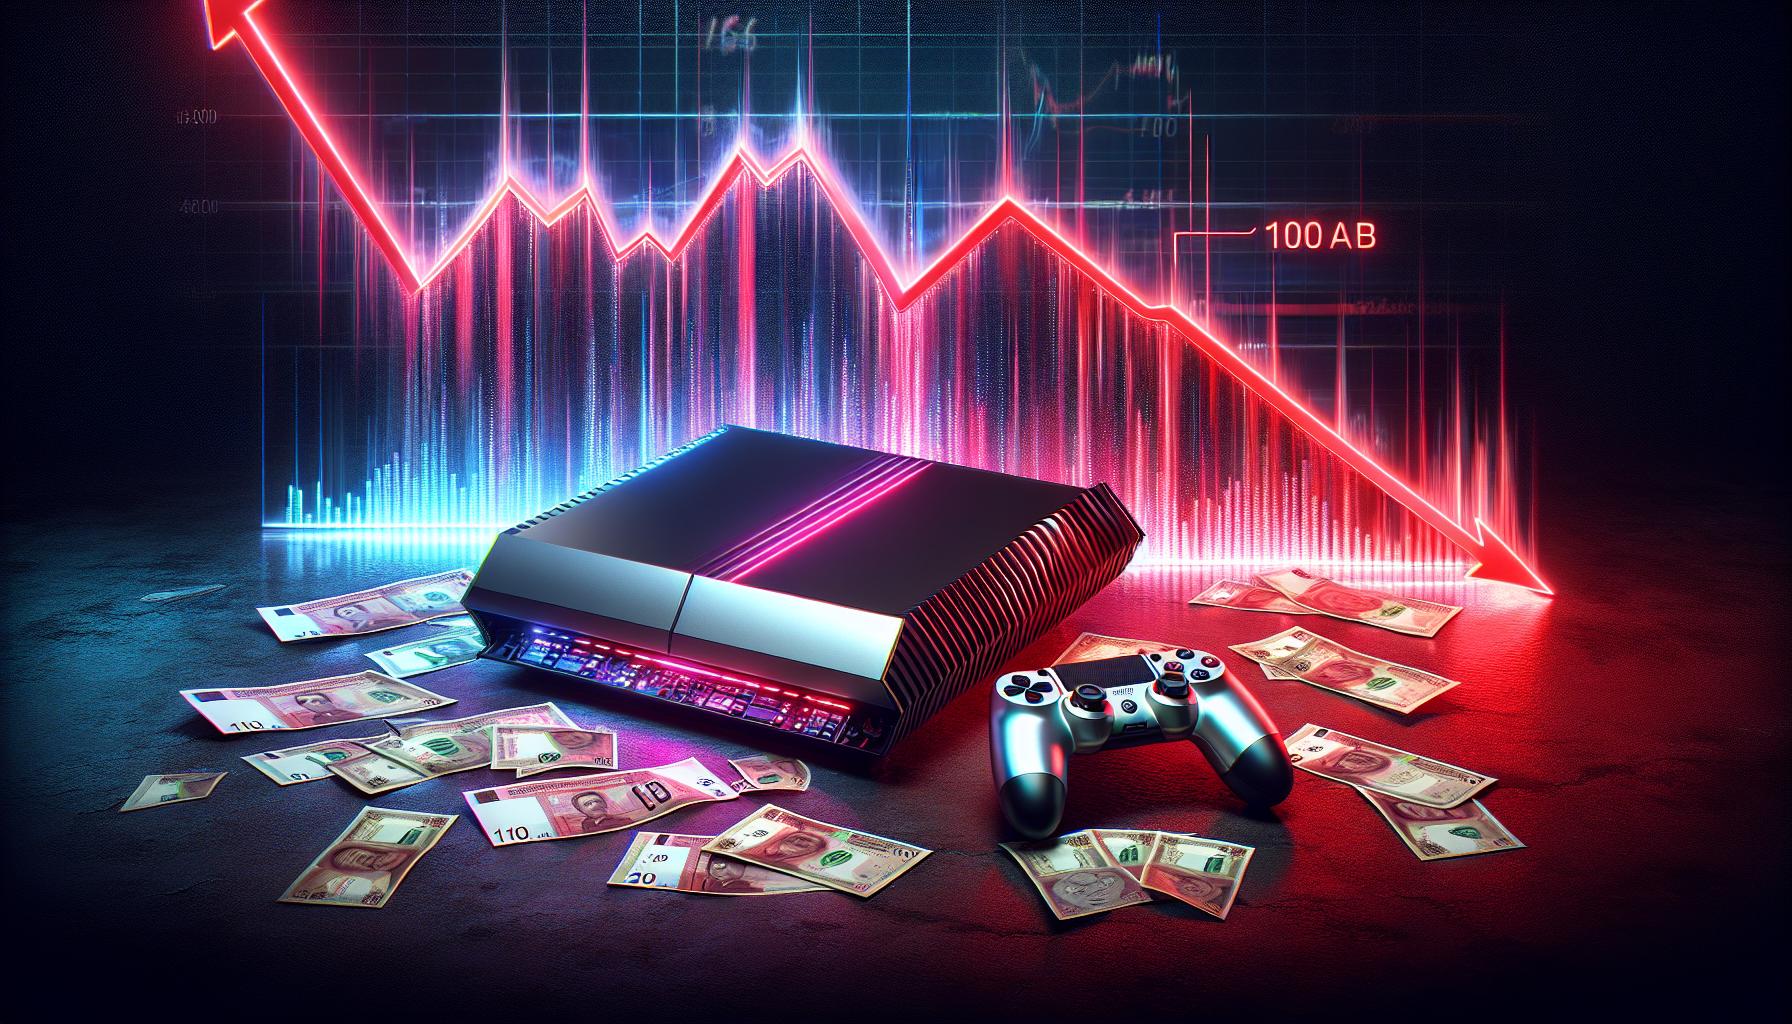 Sony's Stock Plummets: PS5 Sales Forecast Slashed | FinOracle